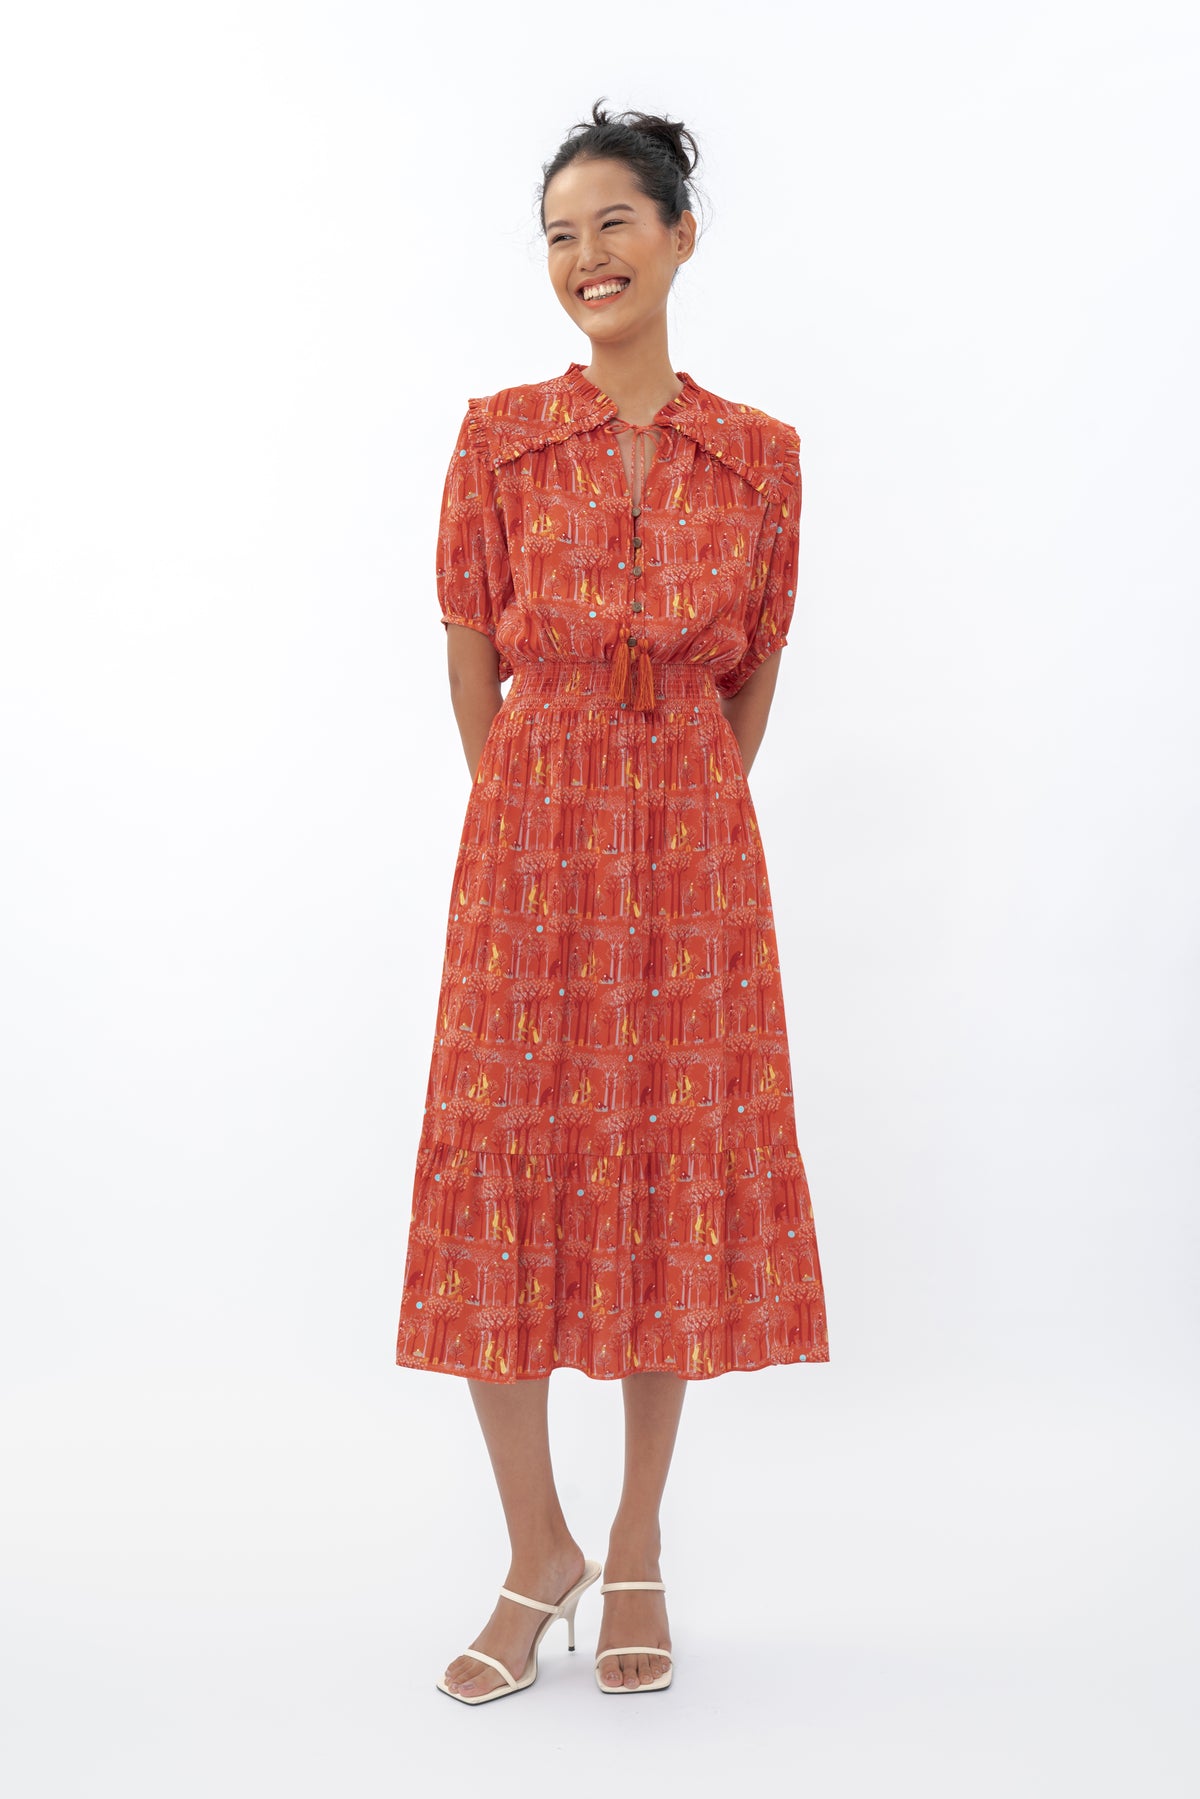 MALI Dress in Red Forest